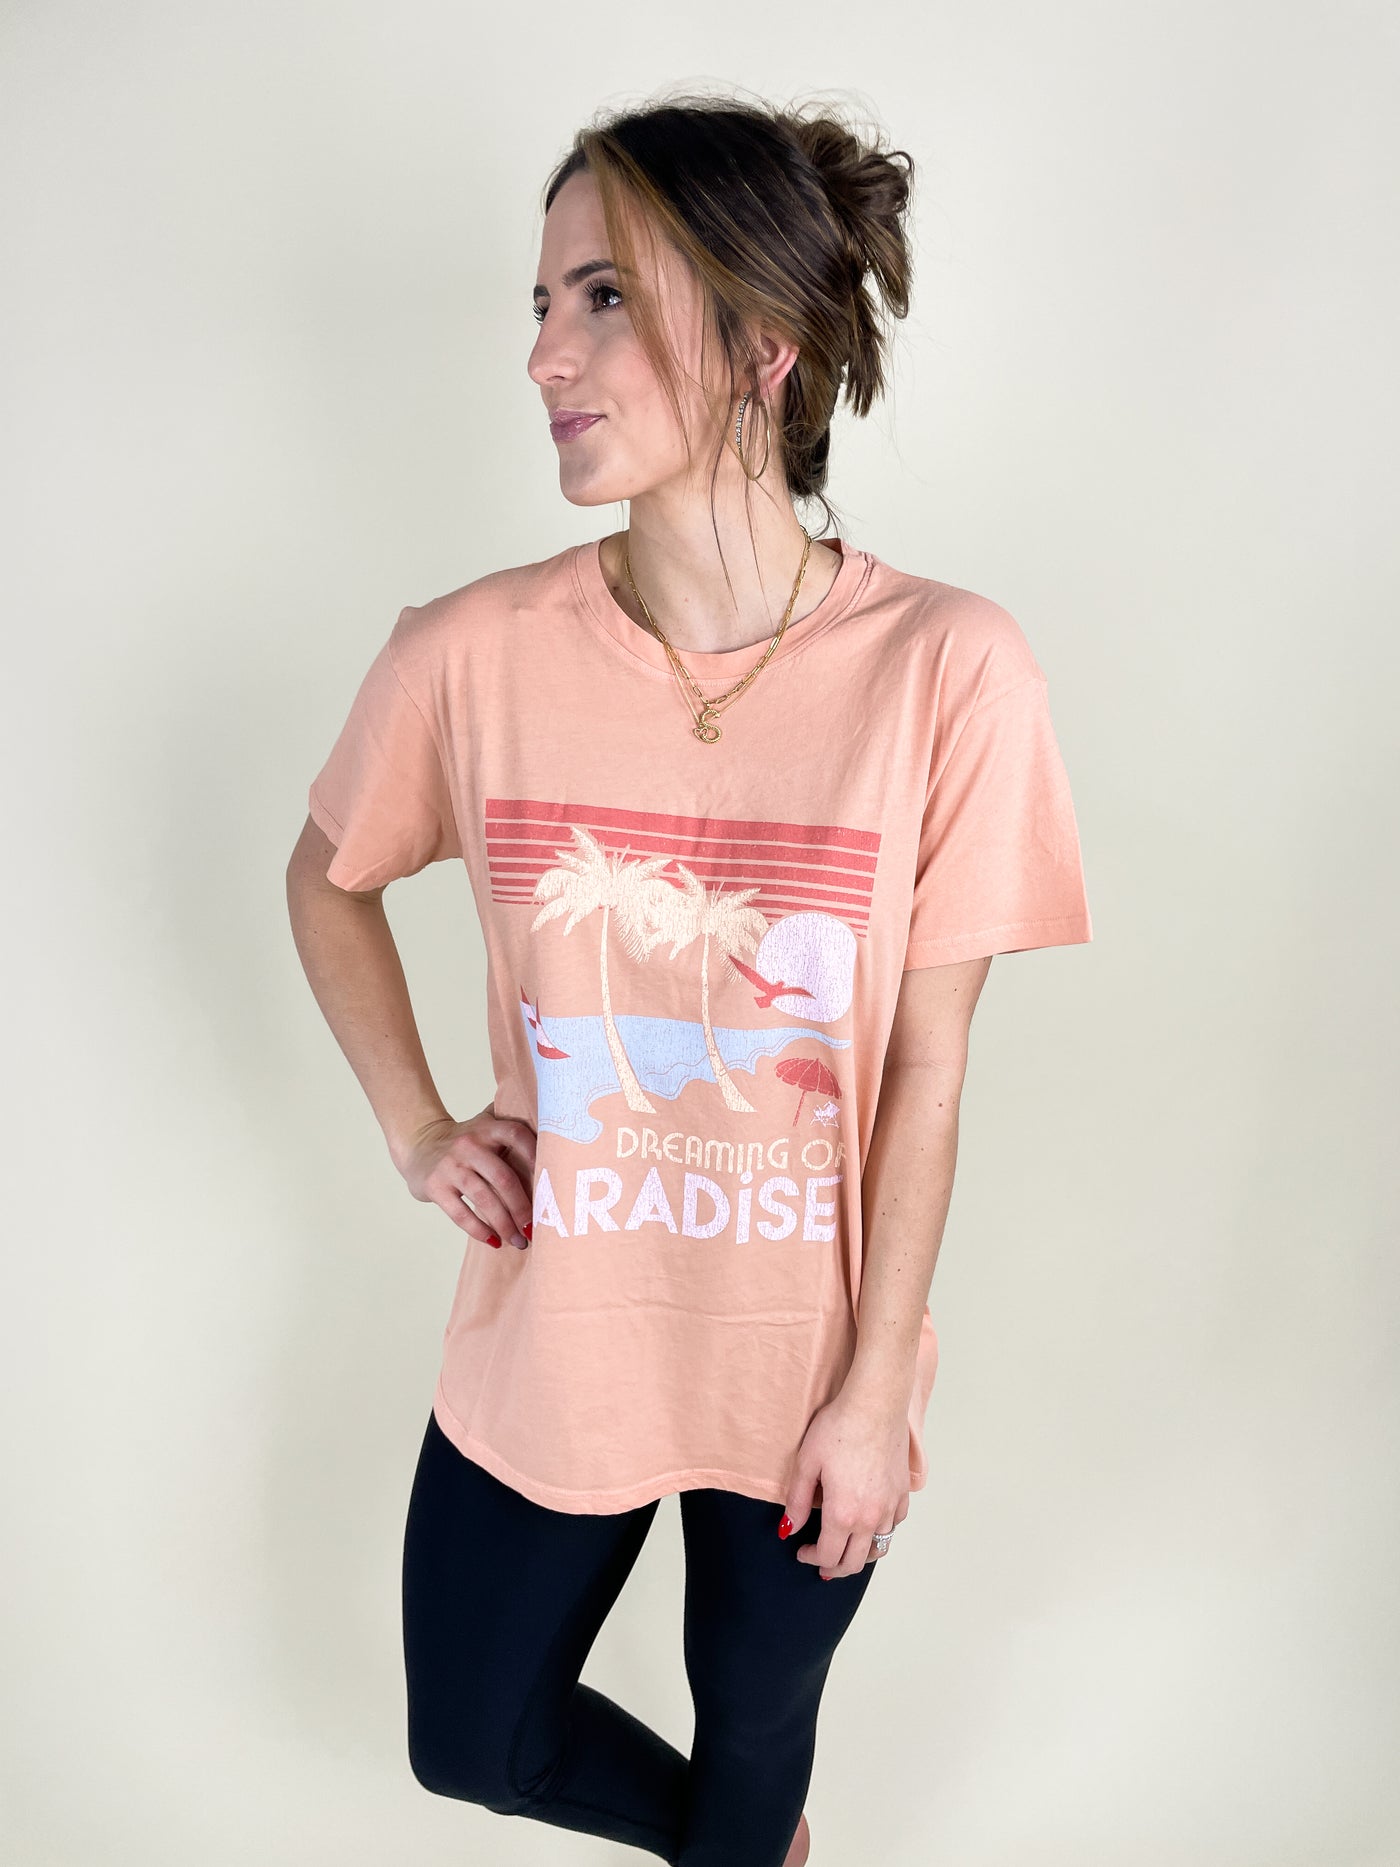 Dreaming Of Paradise Tee